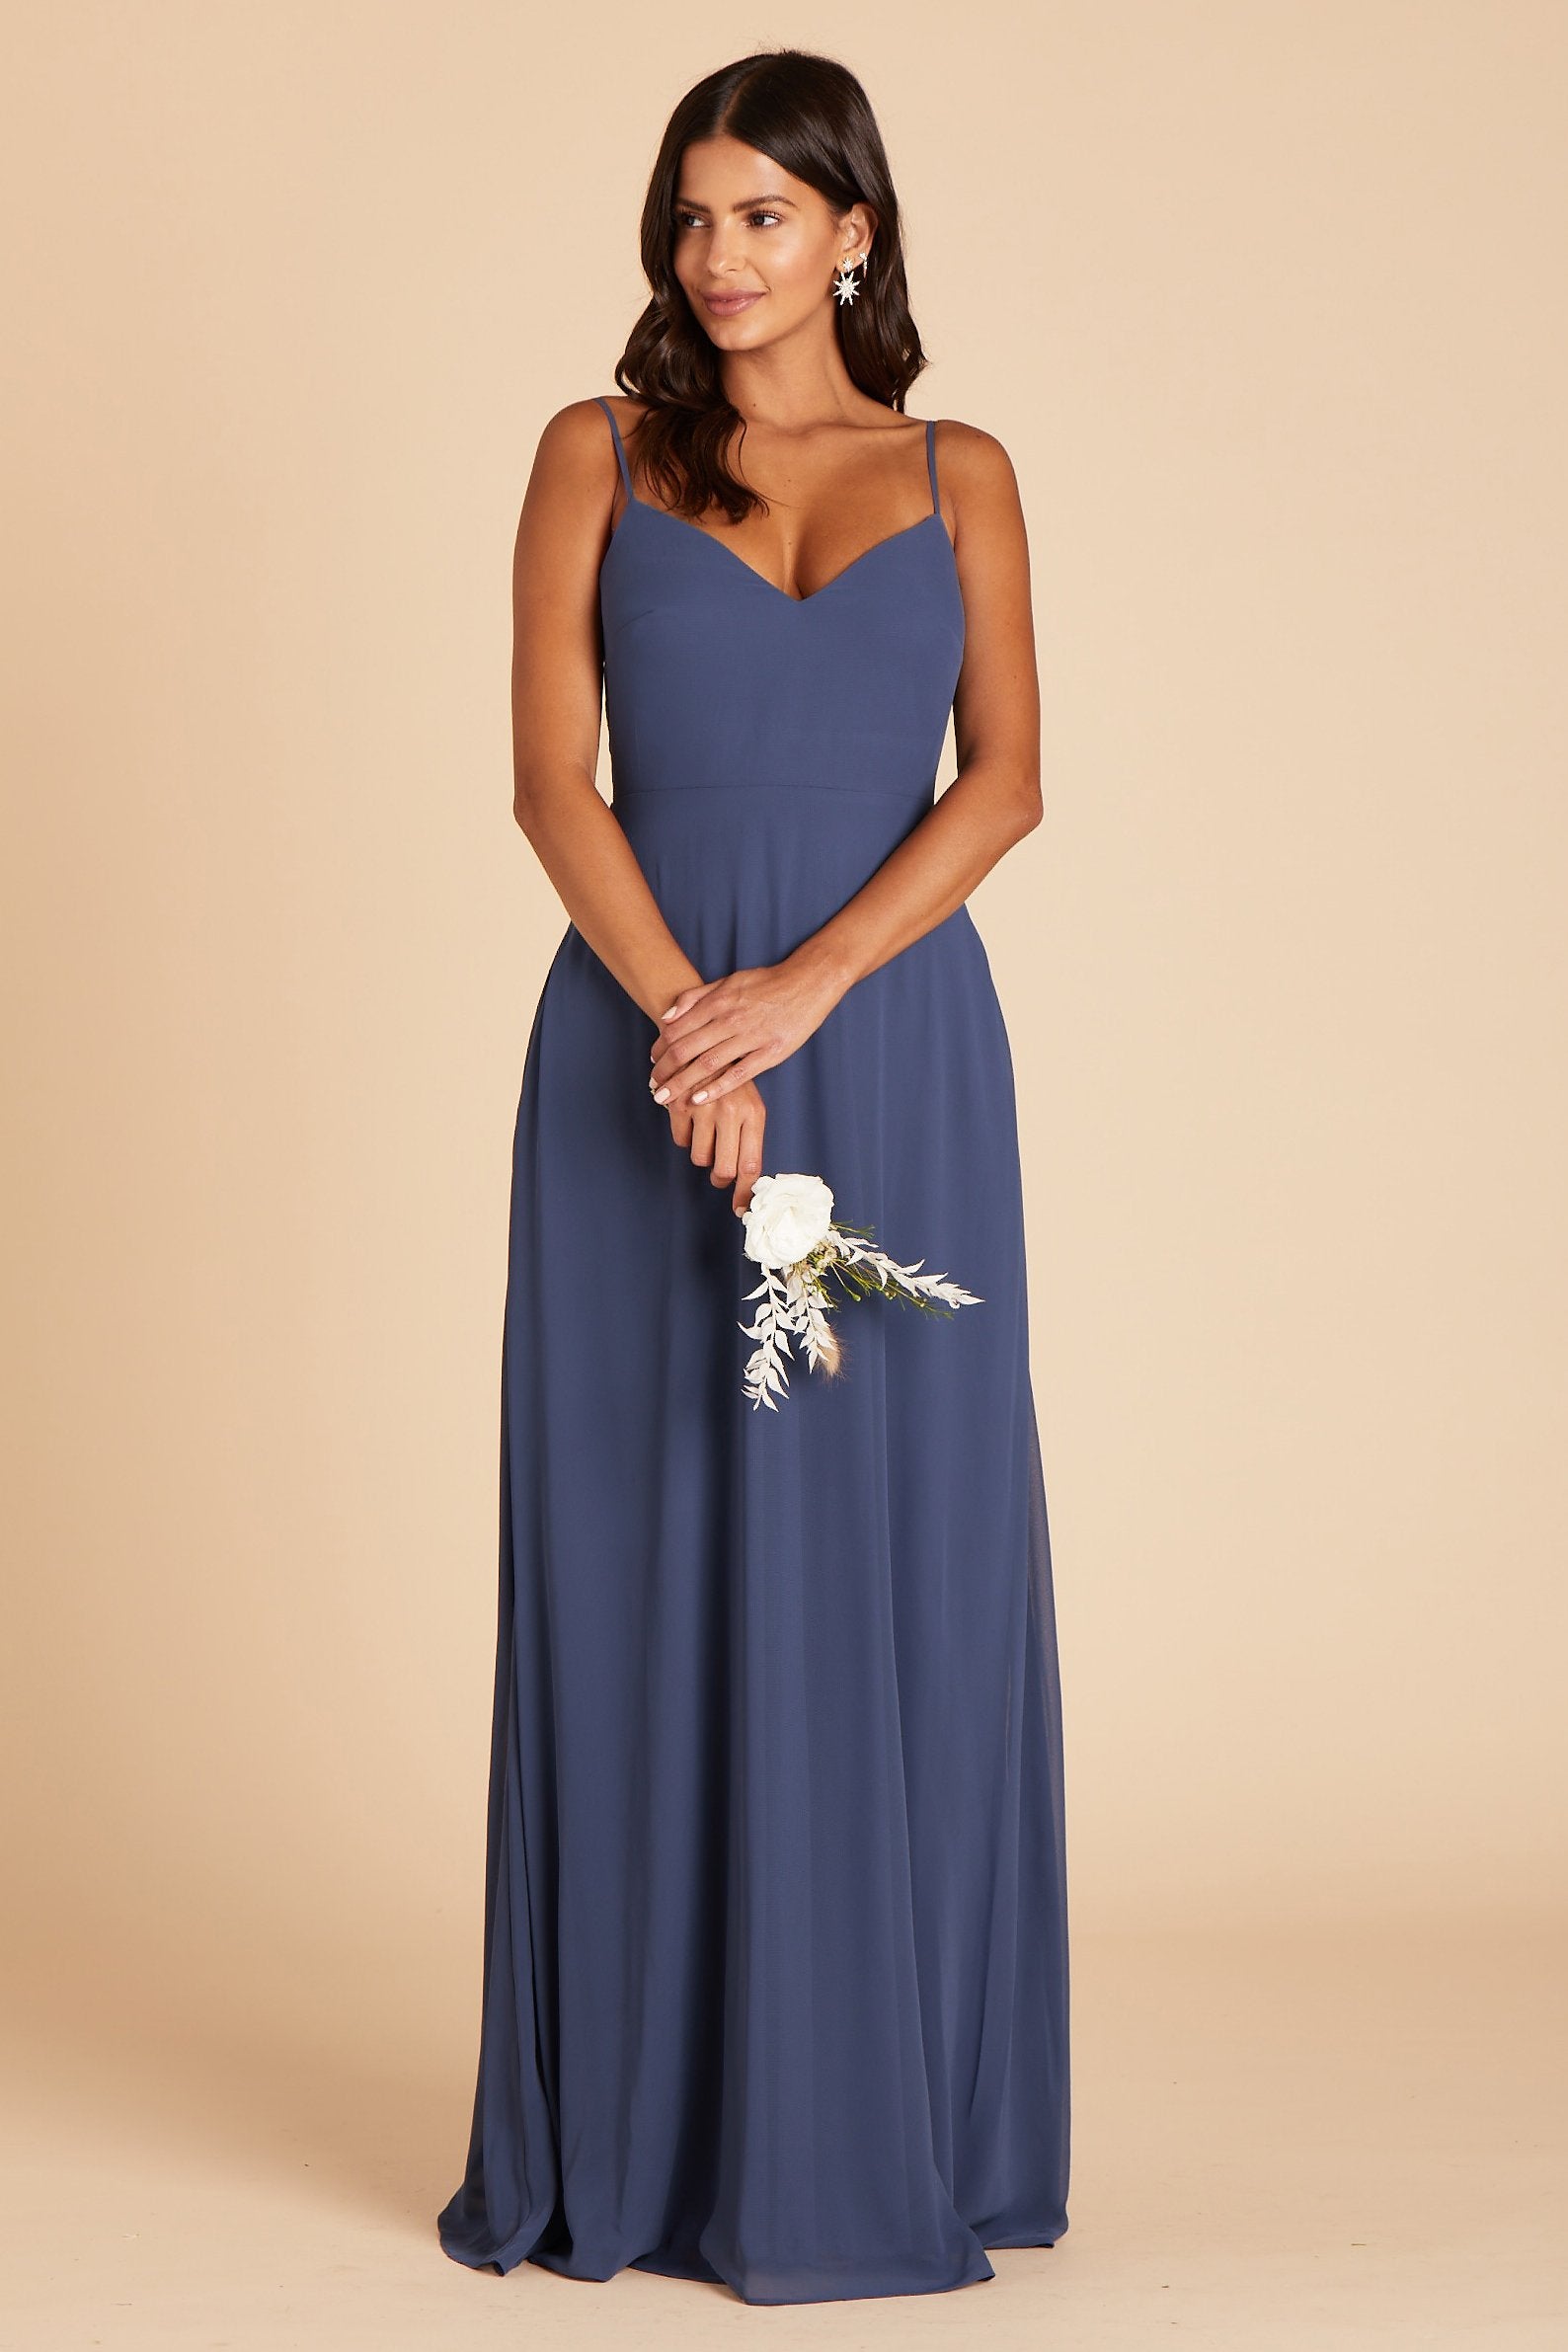 Devin convertible bridesmaids dress in slate blue chiffon by Birdy Grey, front view